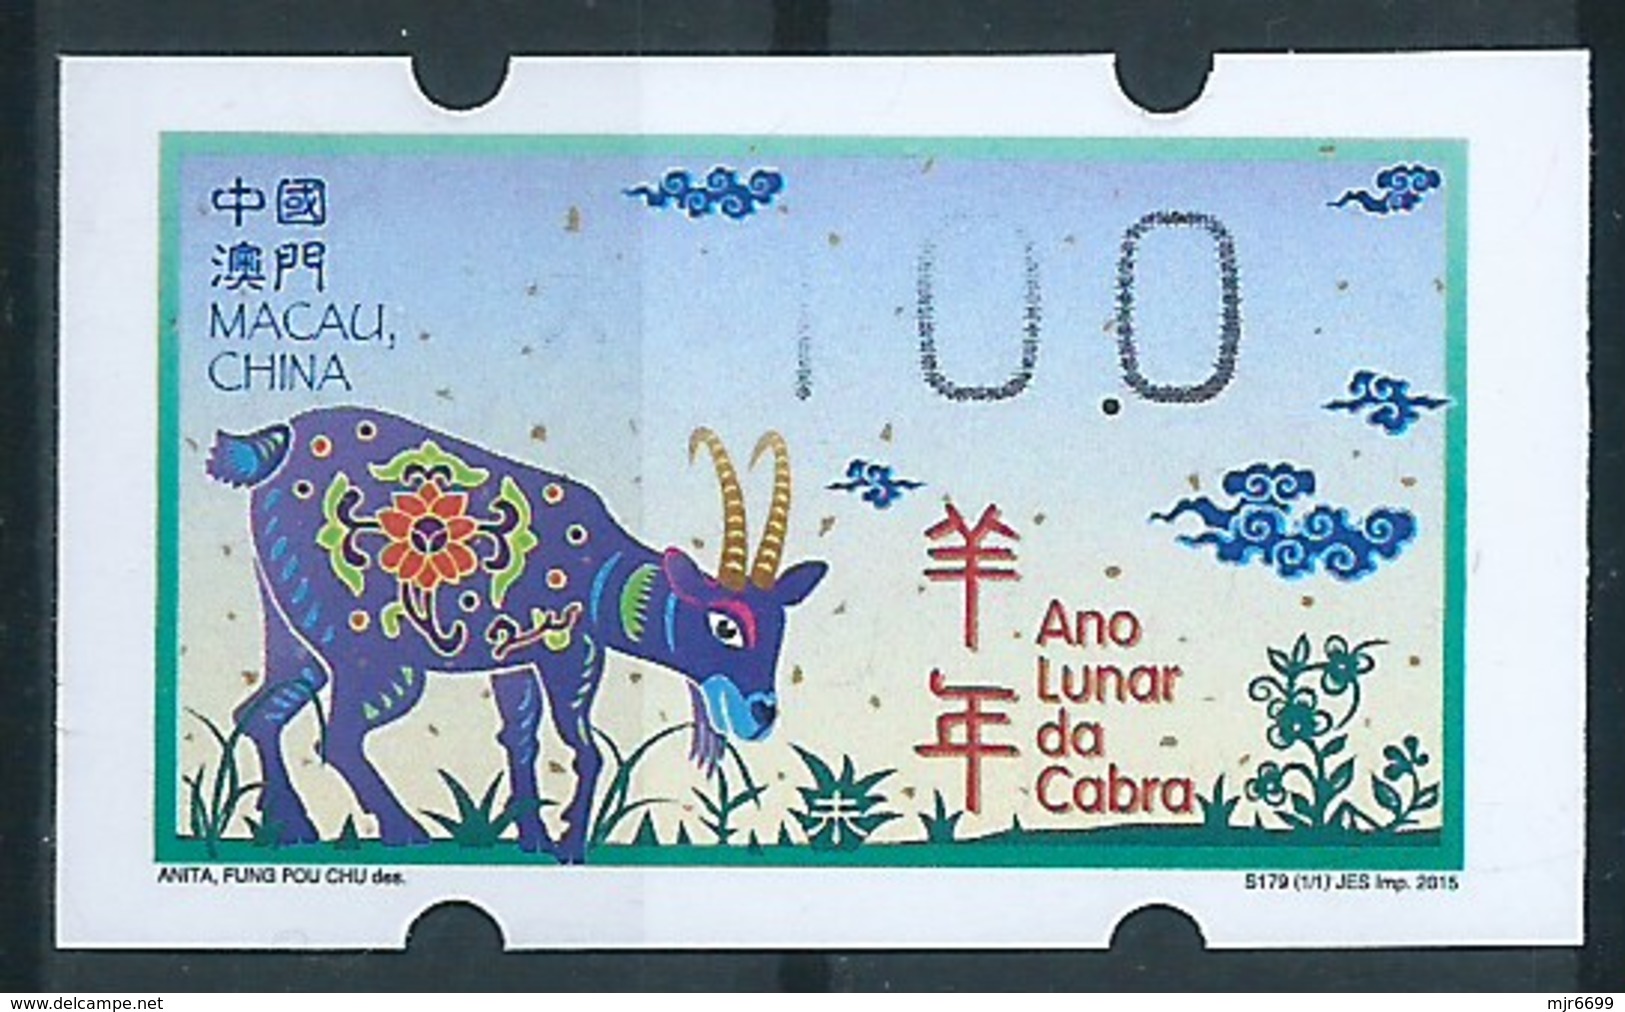 MACAU 2015 LUNAR NEW YEAR OF THE GOAT ATM LABELS ERROR PRINT - PARTLY NO INK PRINT, ALMOST MISSING '1' & "STARS" - Automatenmarken